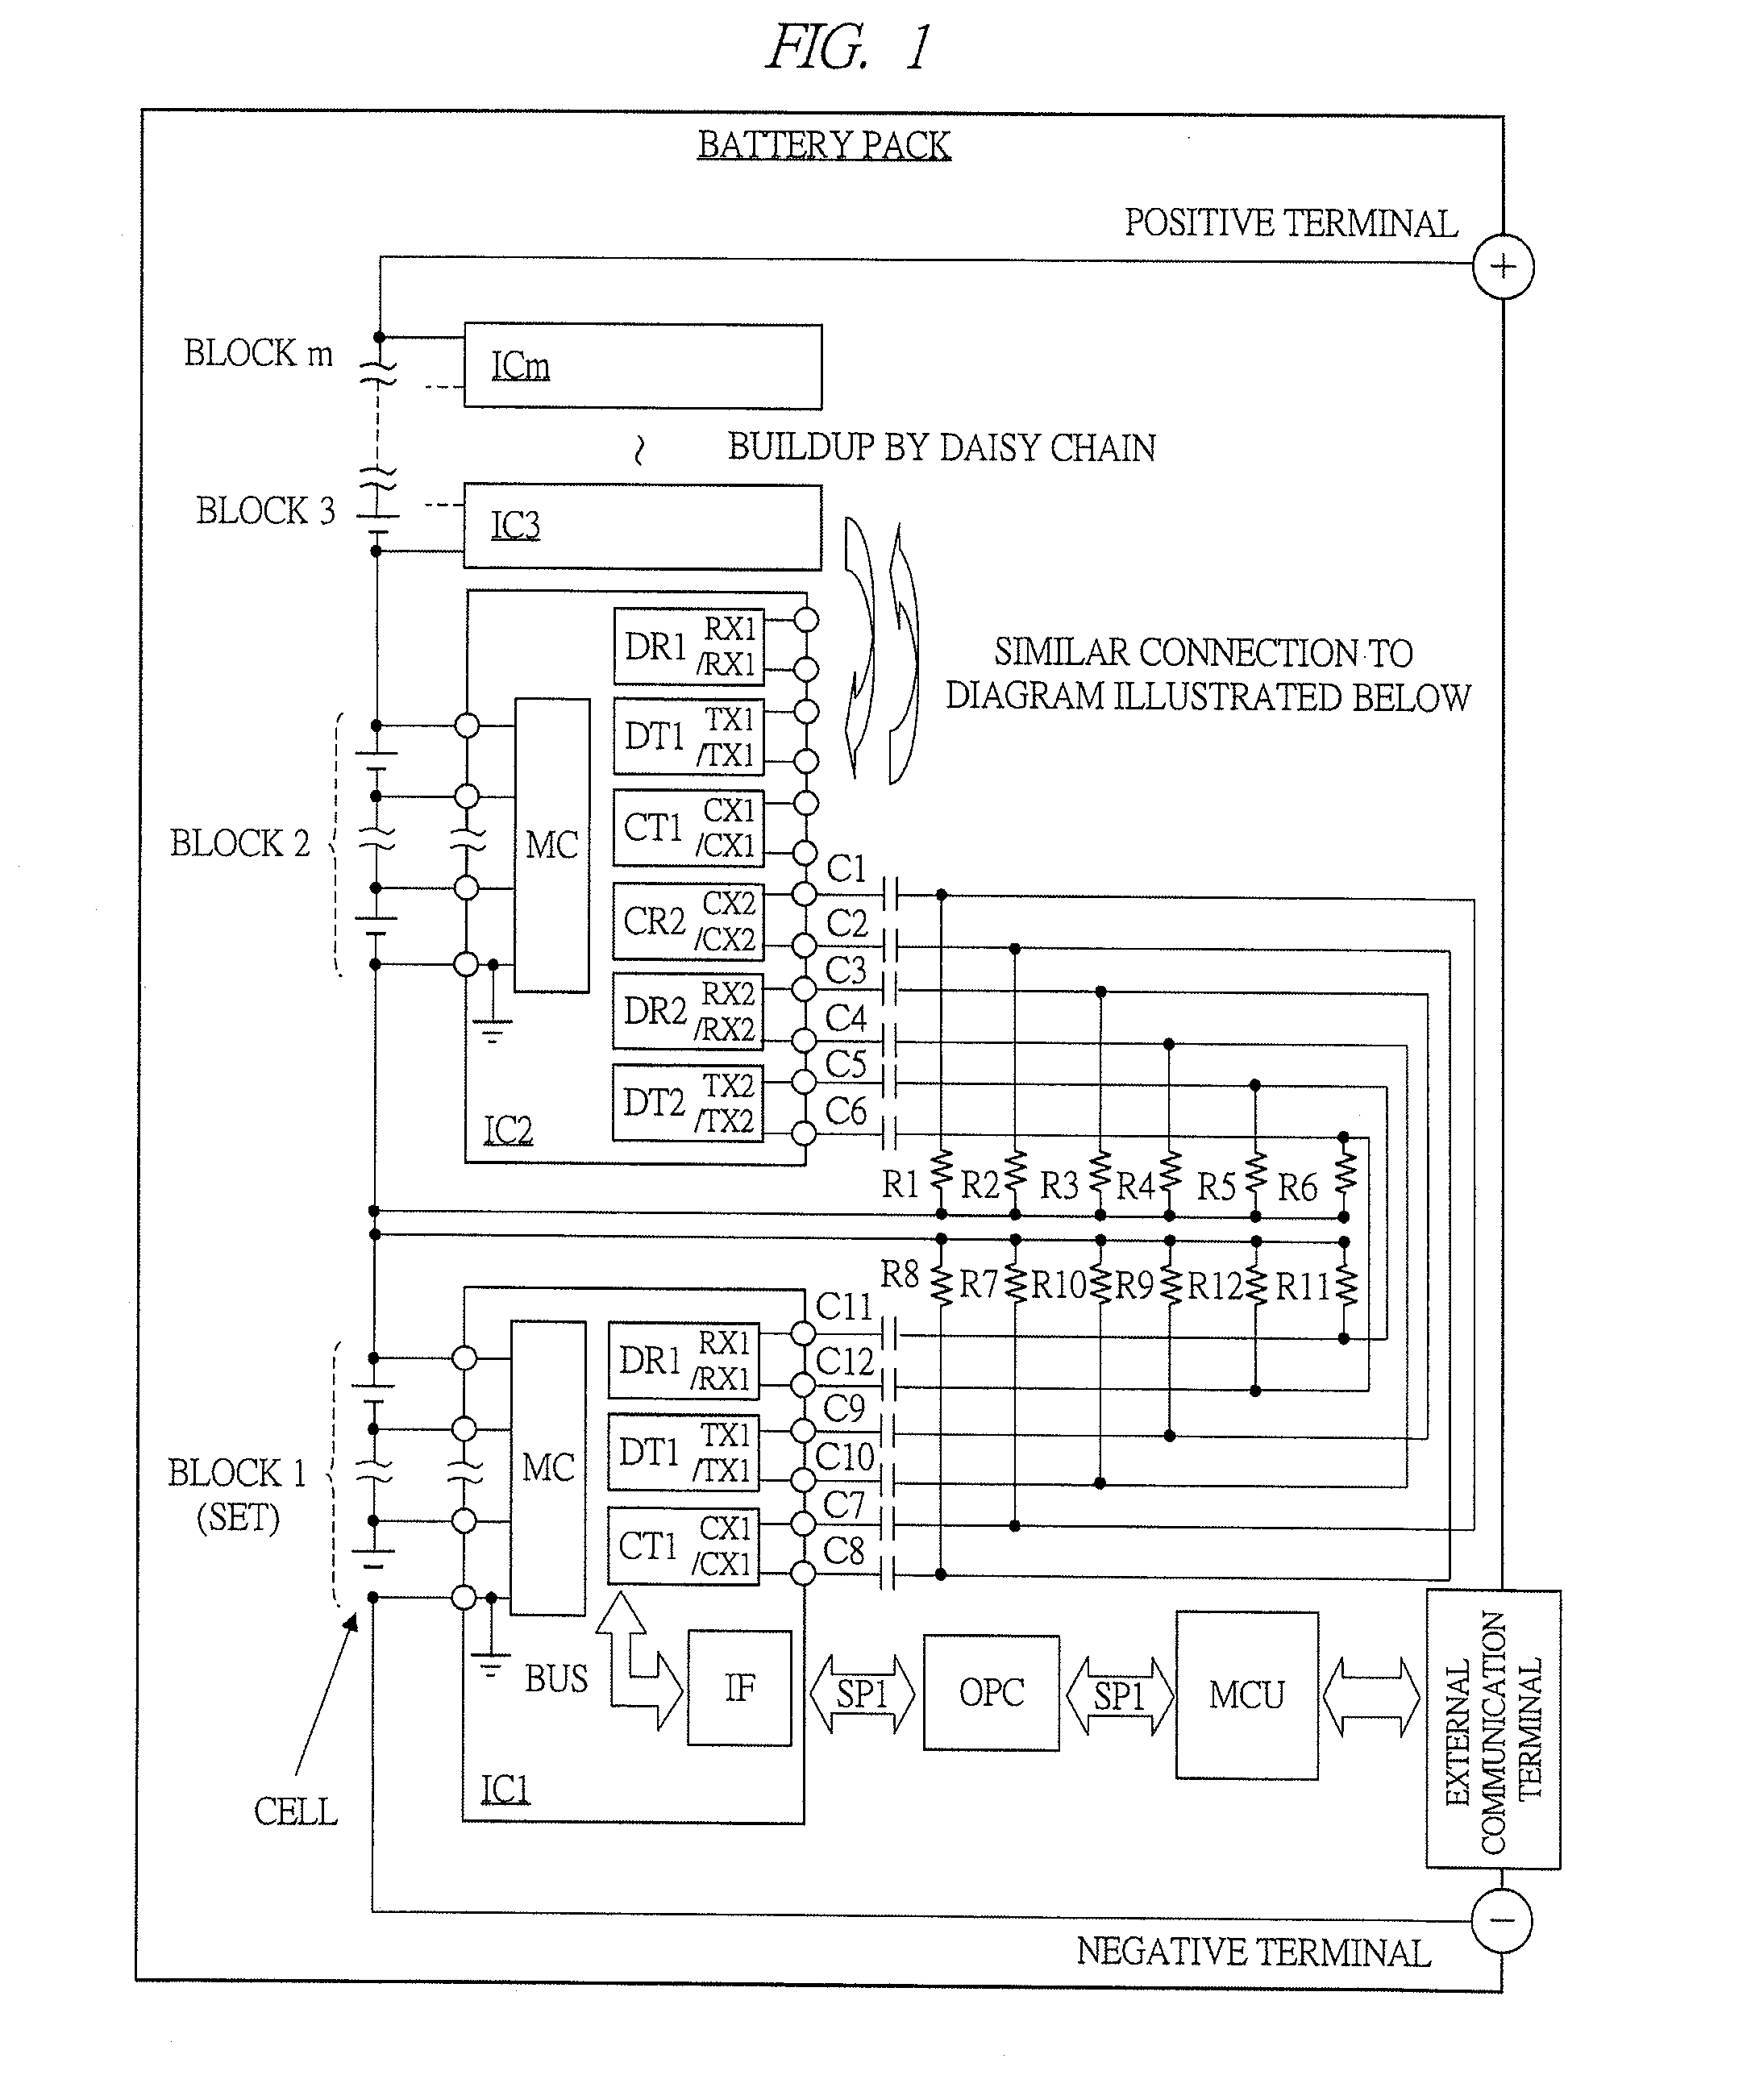 Charging/discharging monitoring device and battery pack